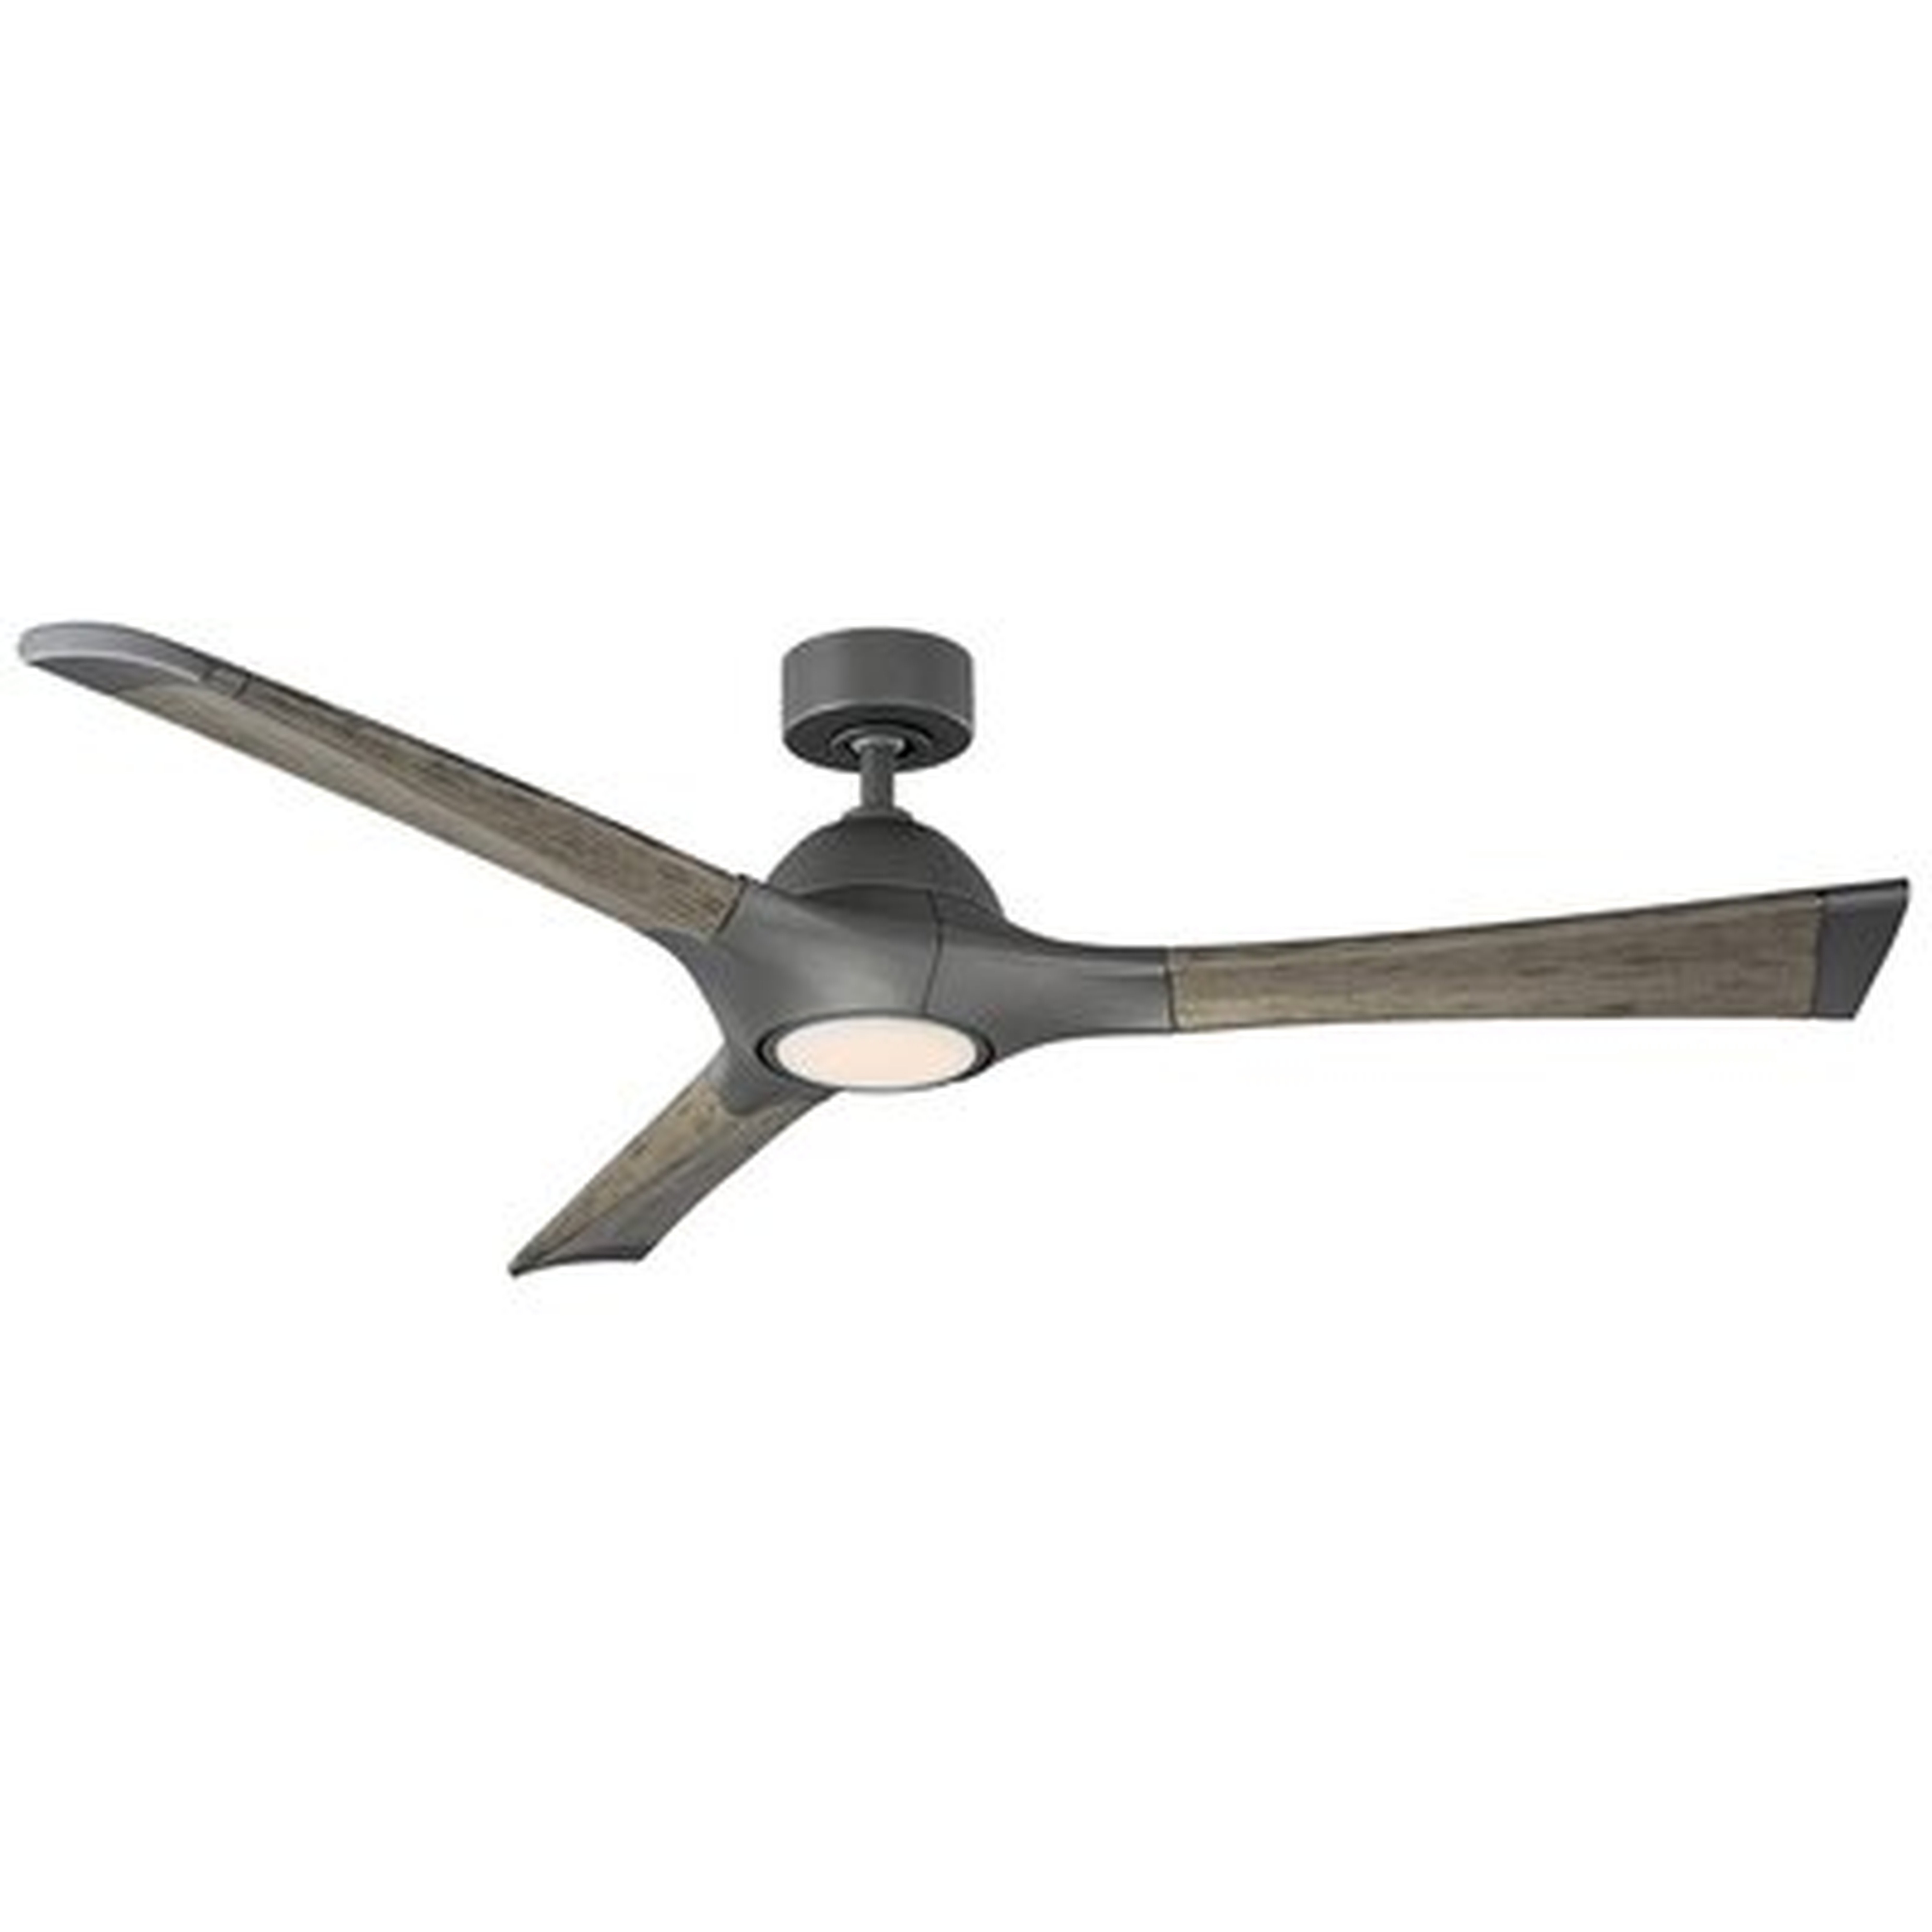 60" Woody 3 - Blade Outdoor LED Smart Propeller Ceiling Fan with Wall Control and Light Kit Included - AllModern